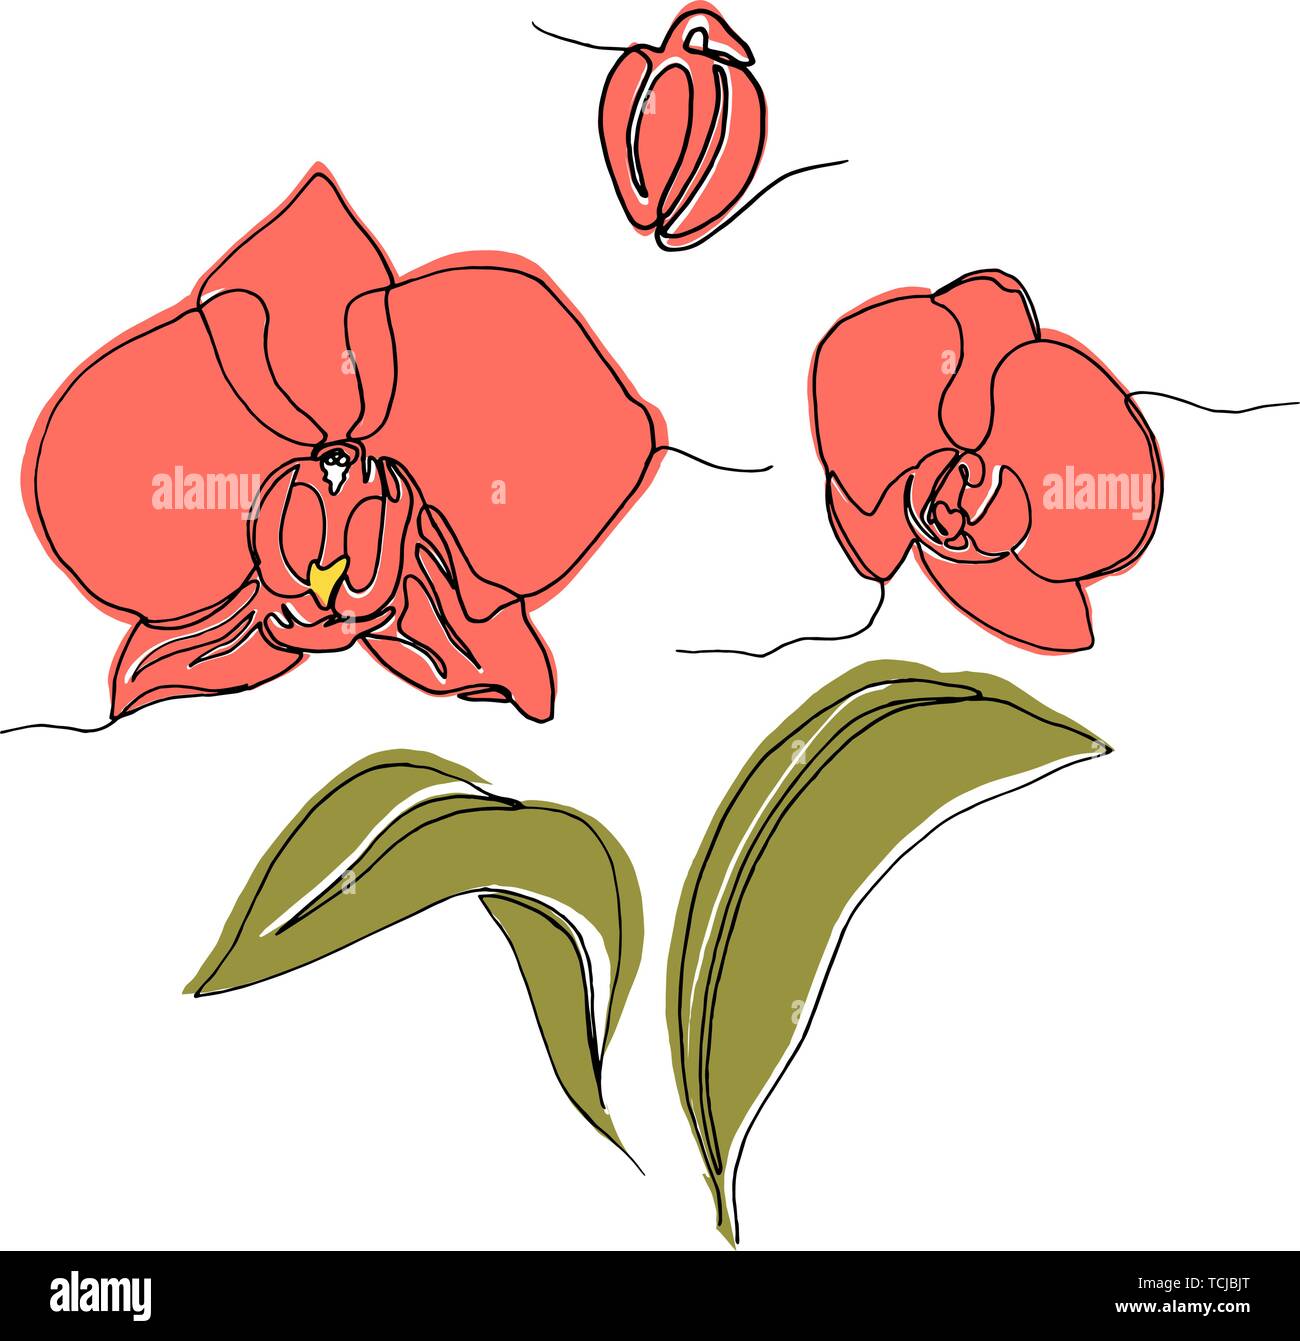 Flower sketch orchid by Pantherhexe on DeviantArt